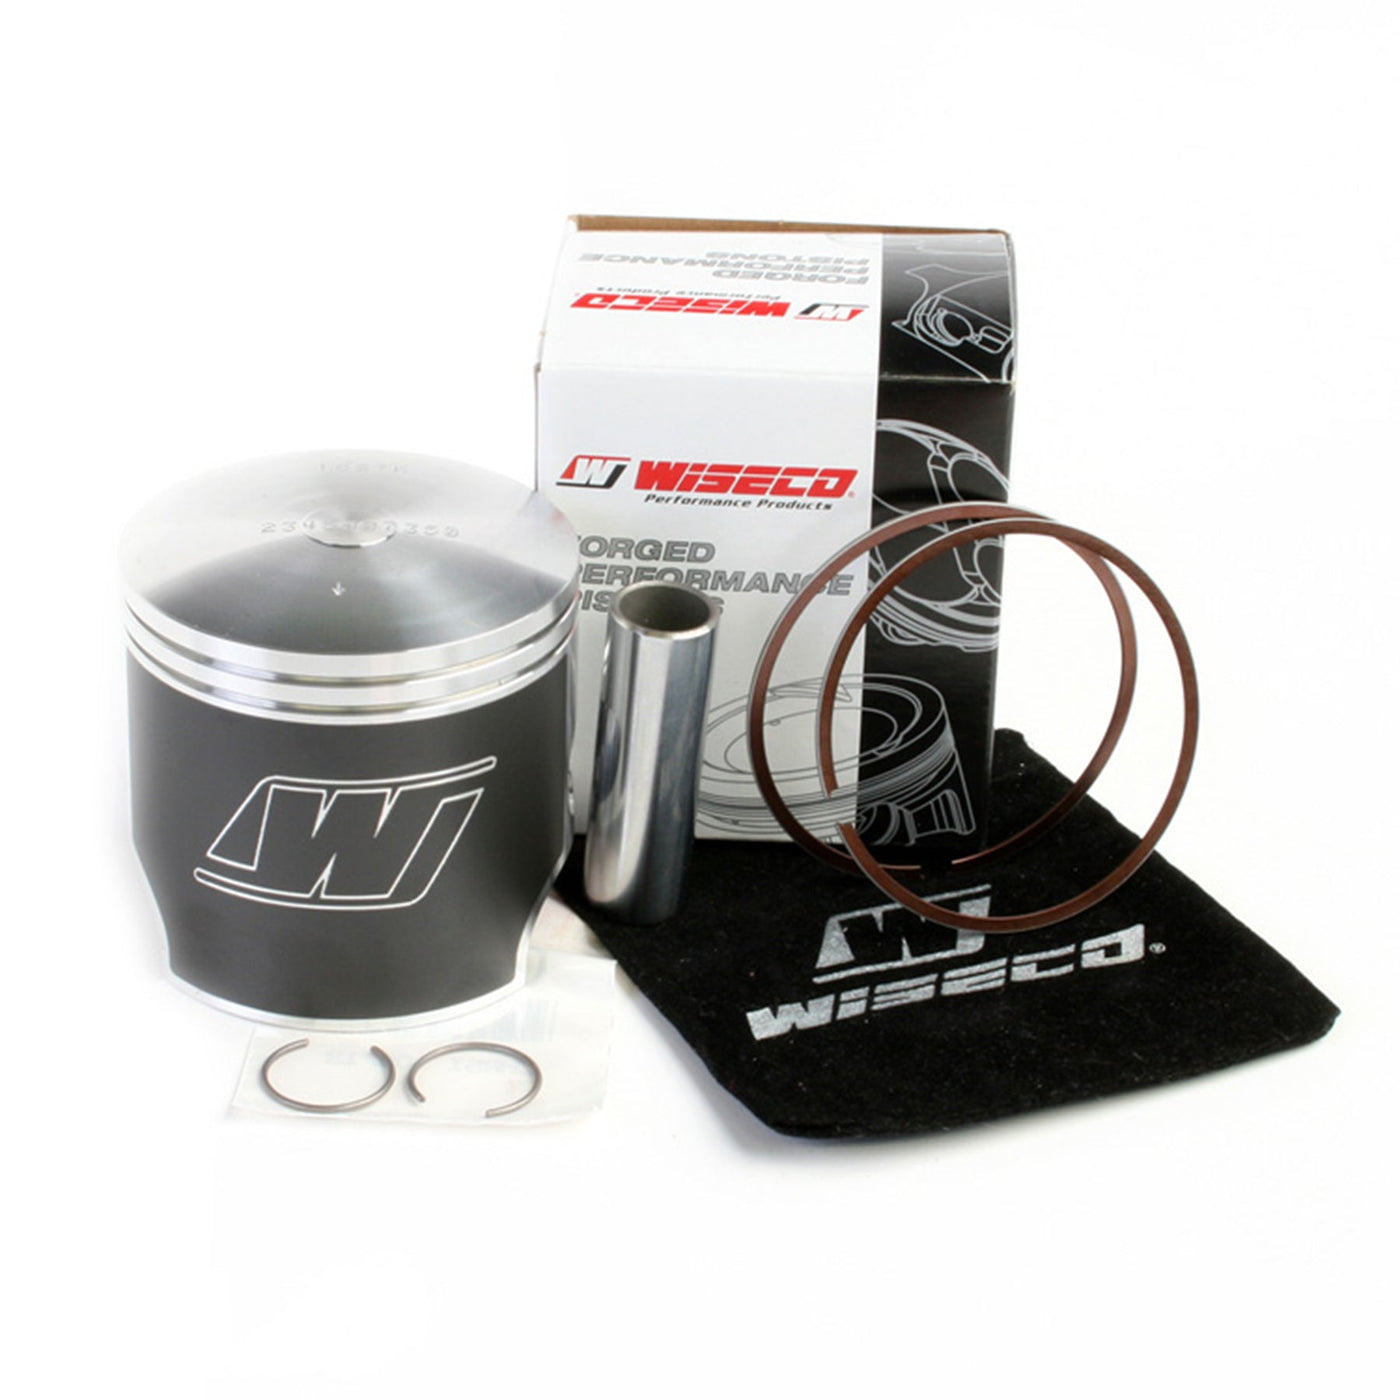 Wiseco PWR138-101 Complete Engine Rebuild Kit #PWR138-101